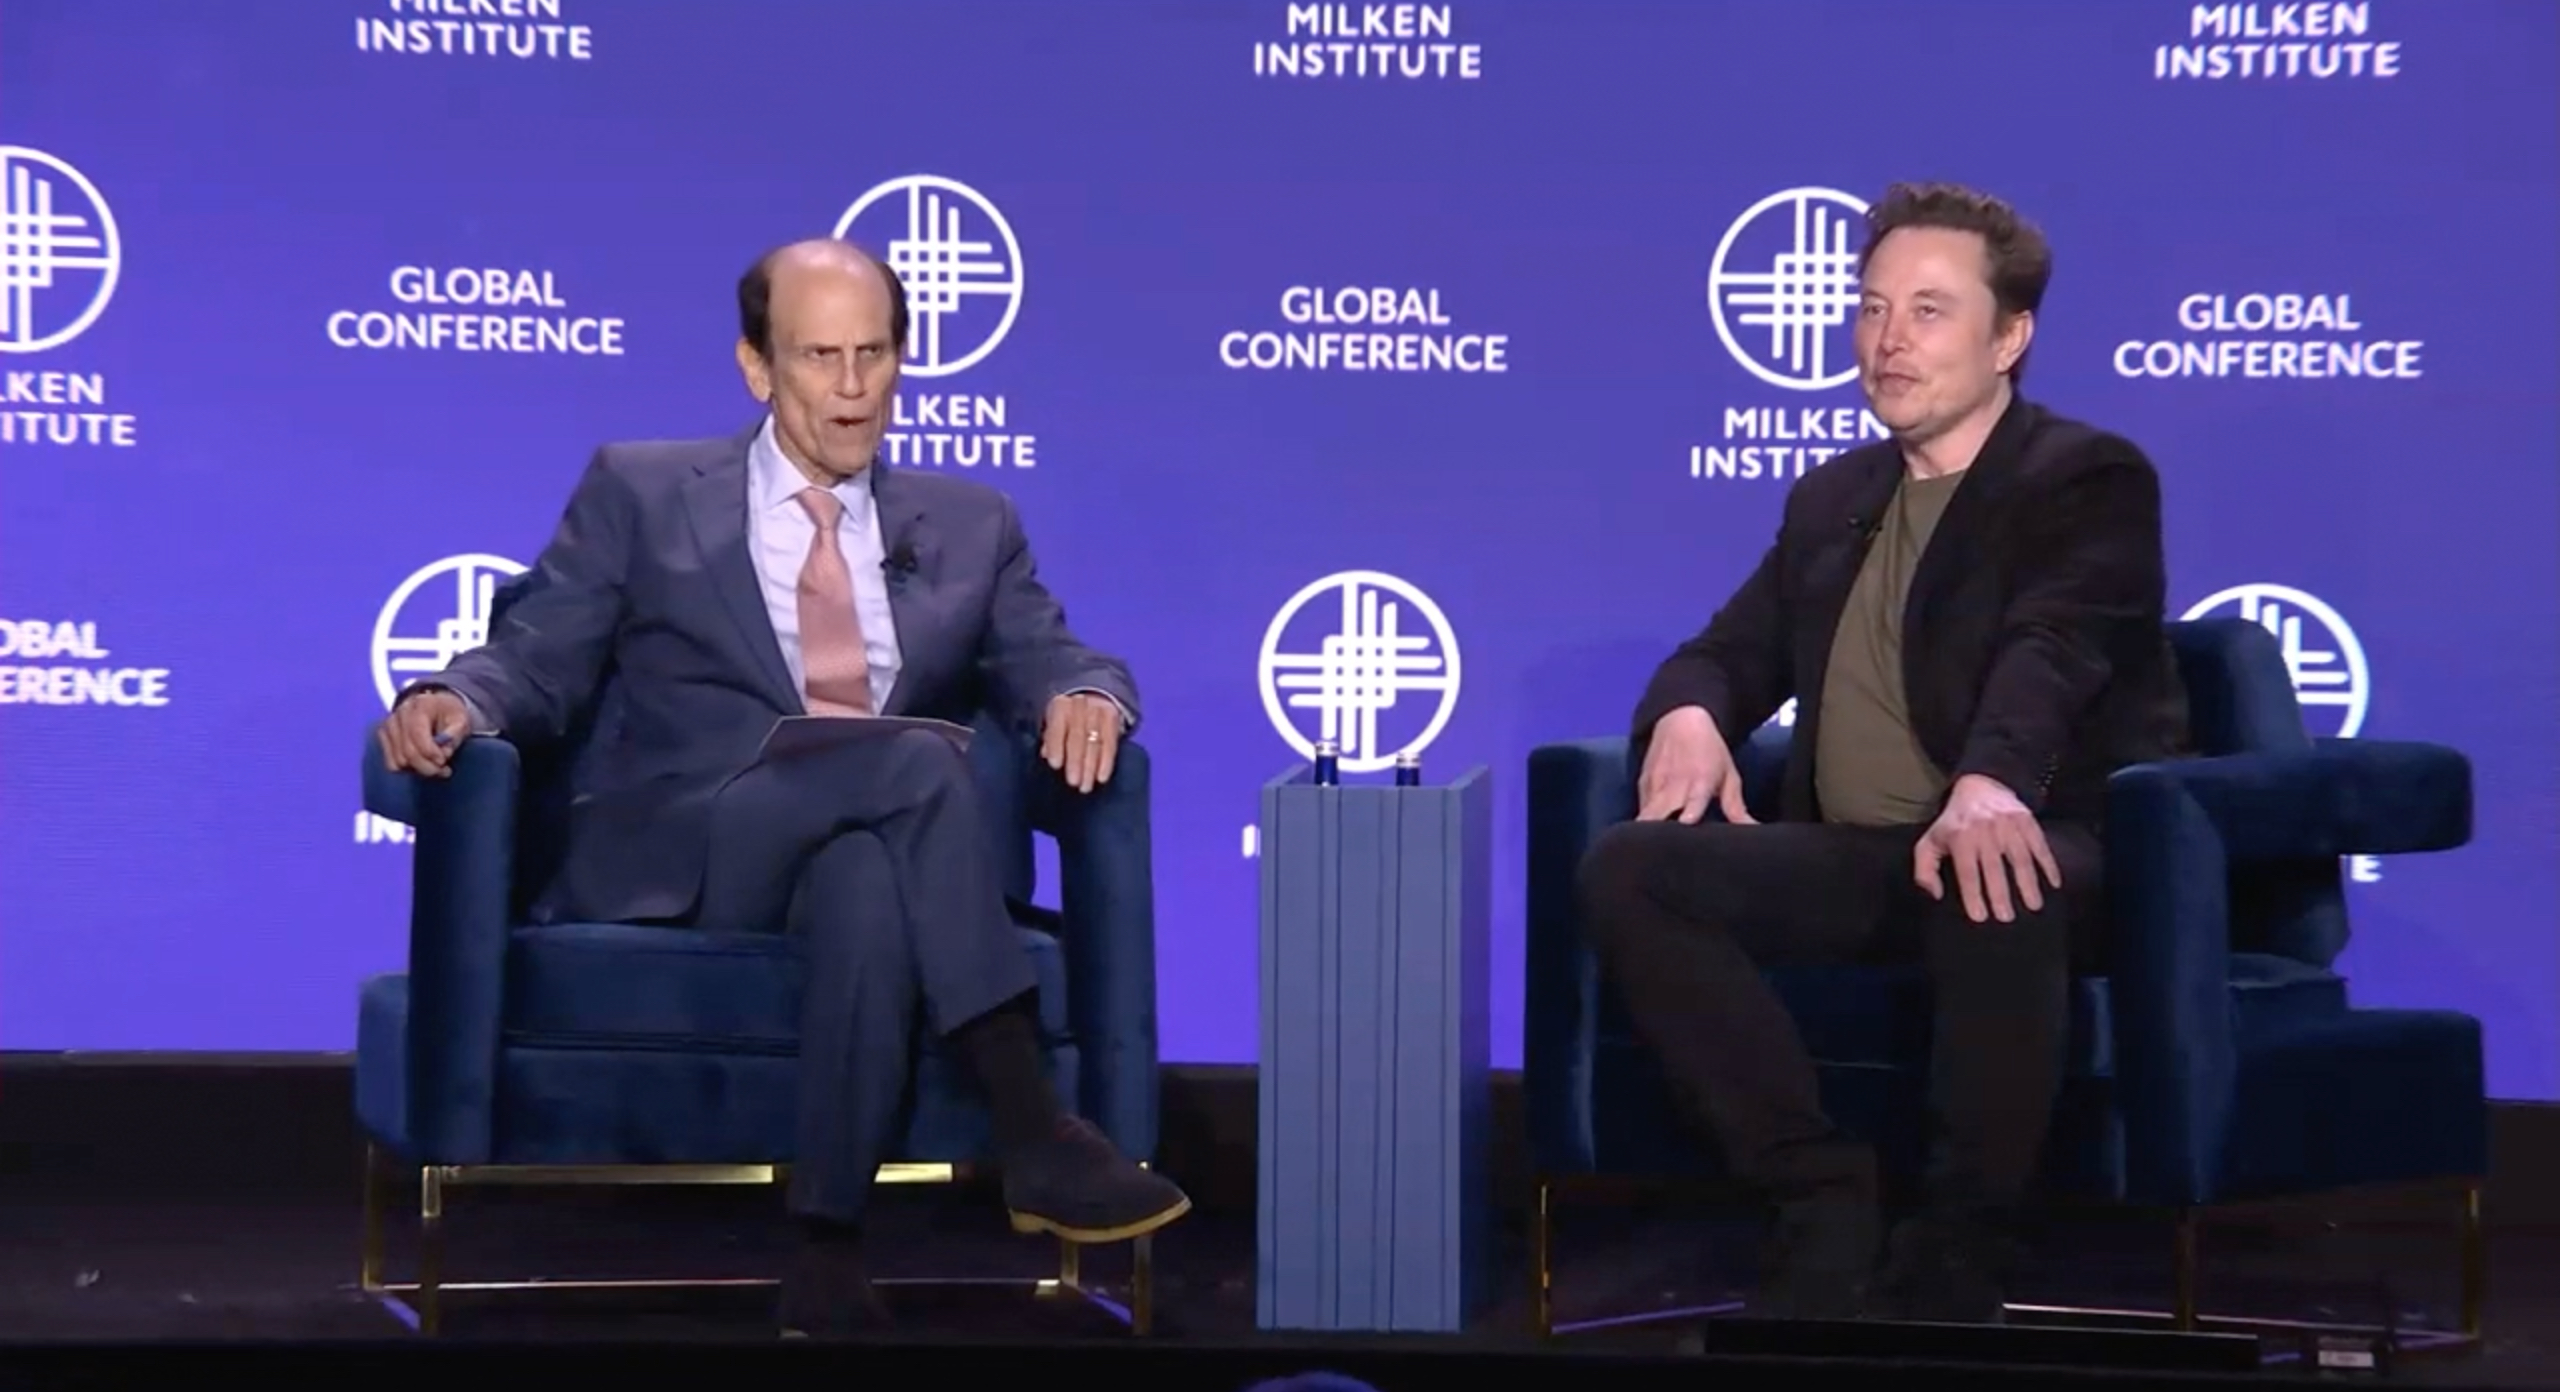 Elon Musk talks space, AI and more in Milken Institute interview